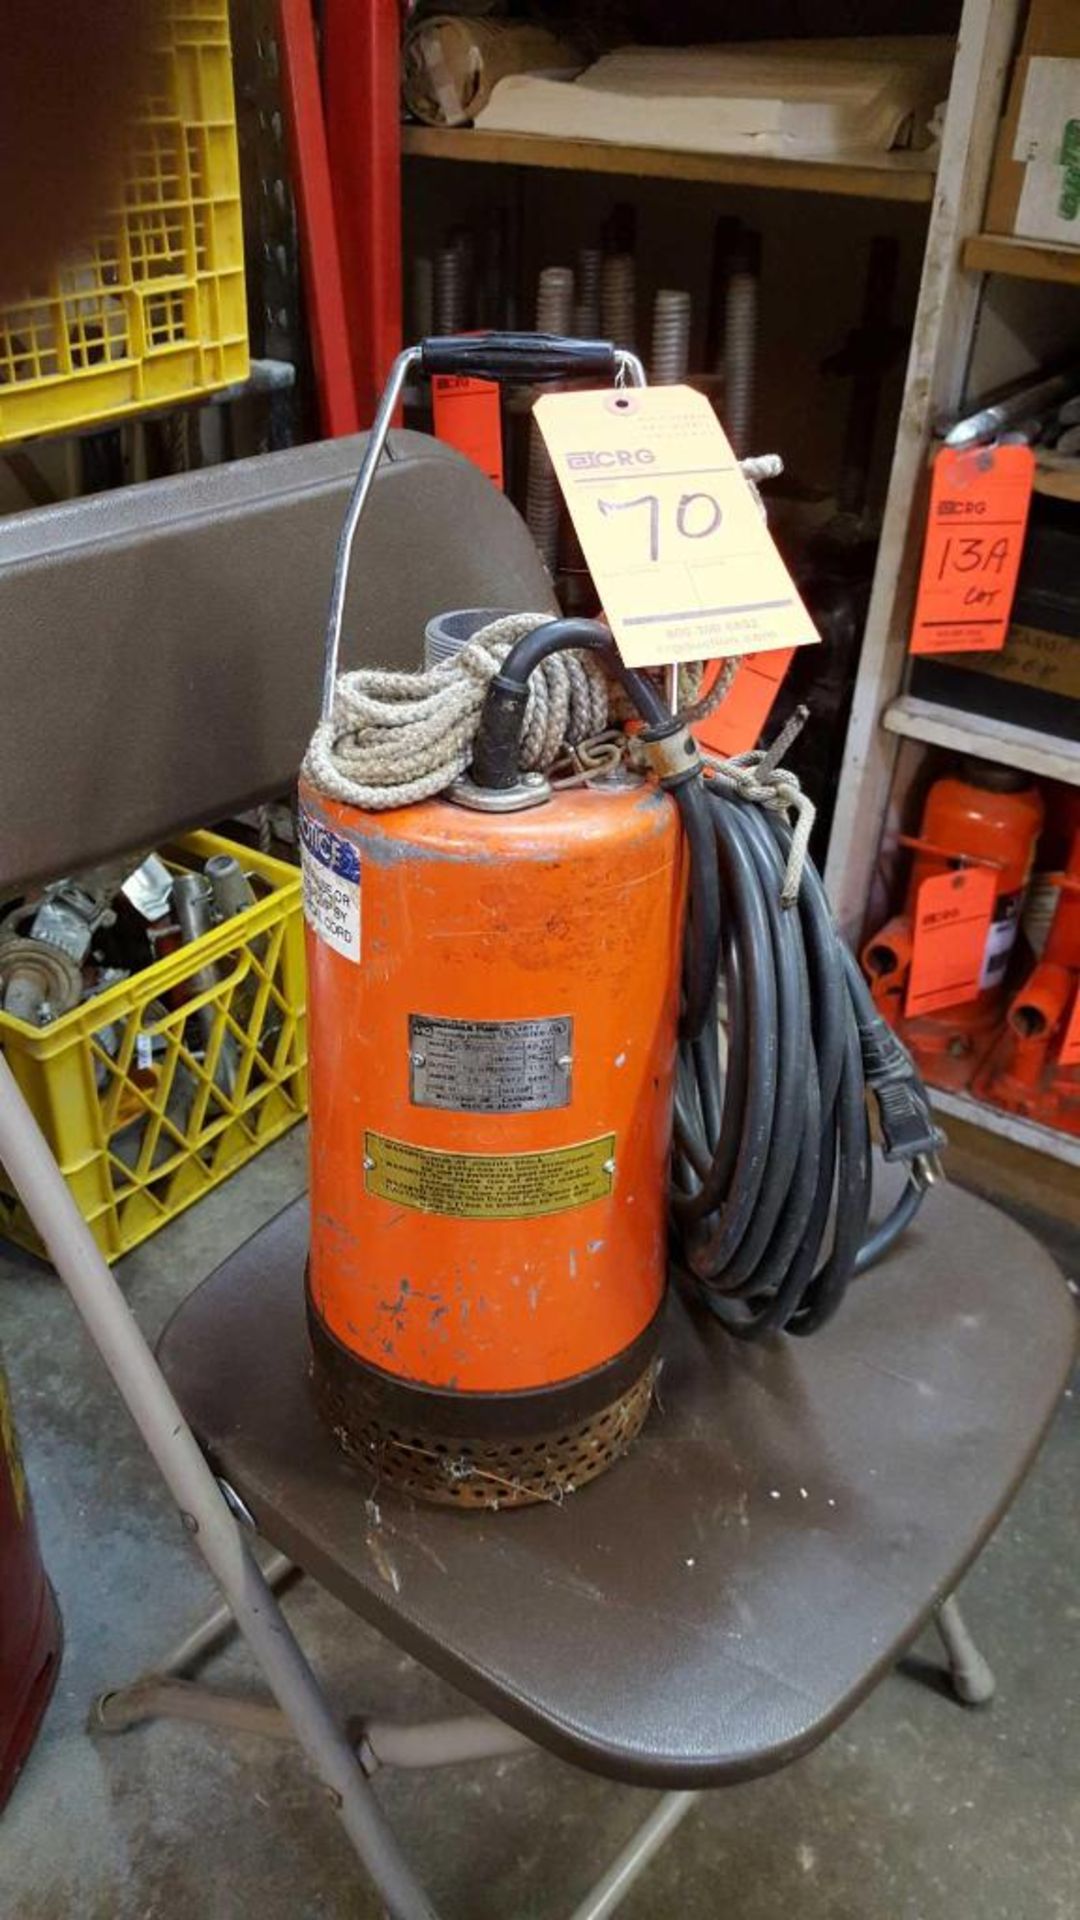 Multiquip electric sump pump, model number St - 2005cul2, 1/2 HP, 76 GPM, 1 phase, 2" capacity